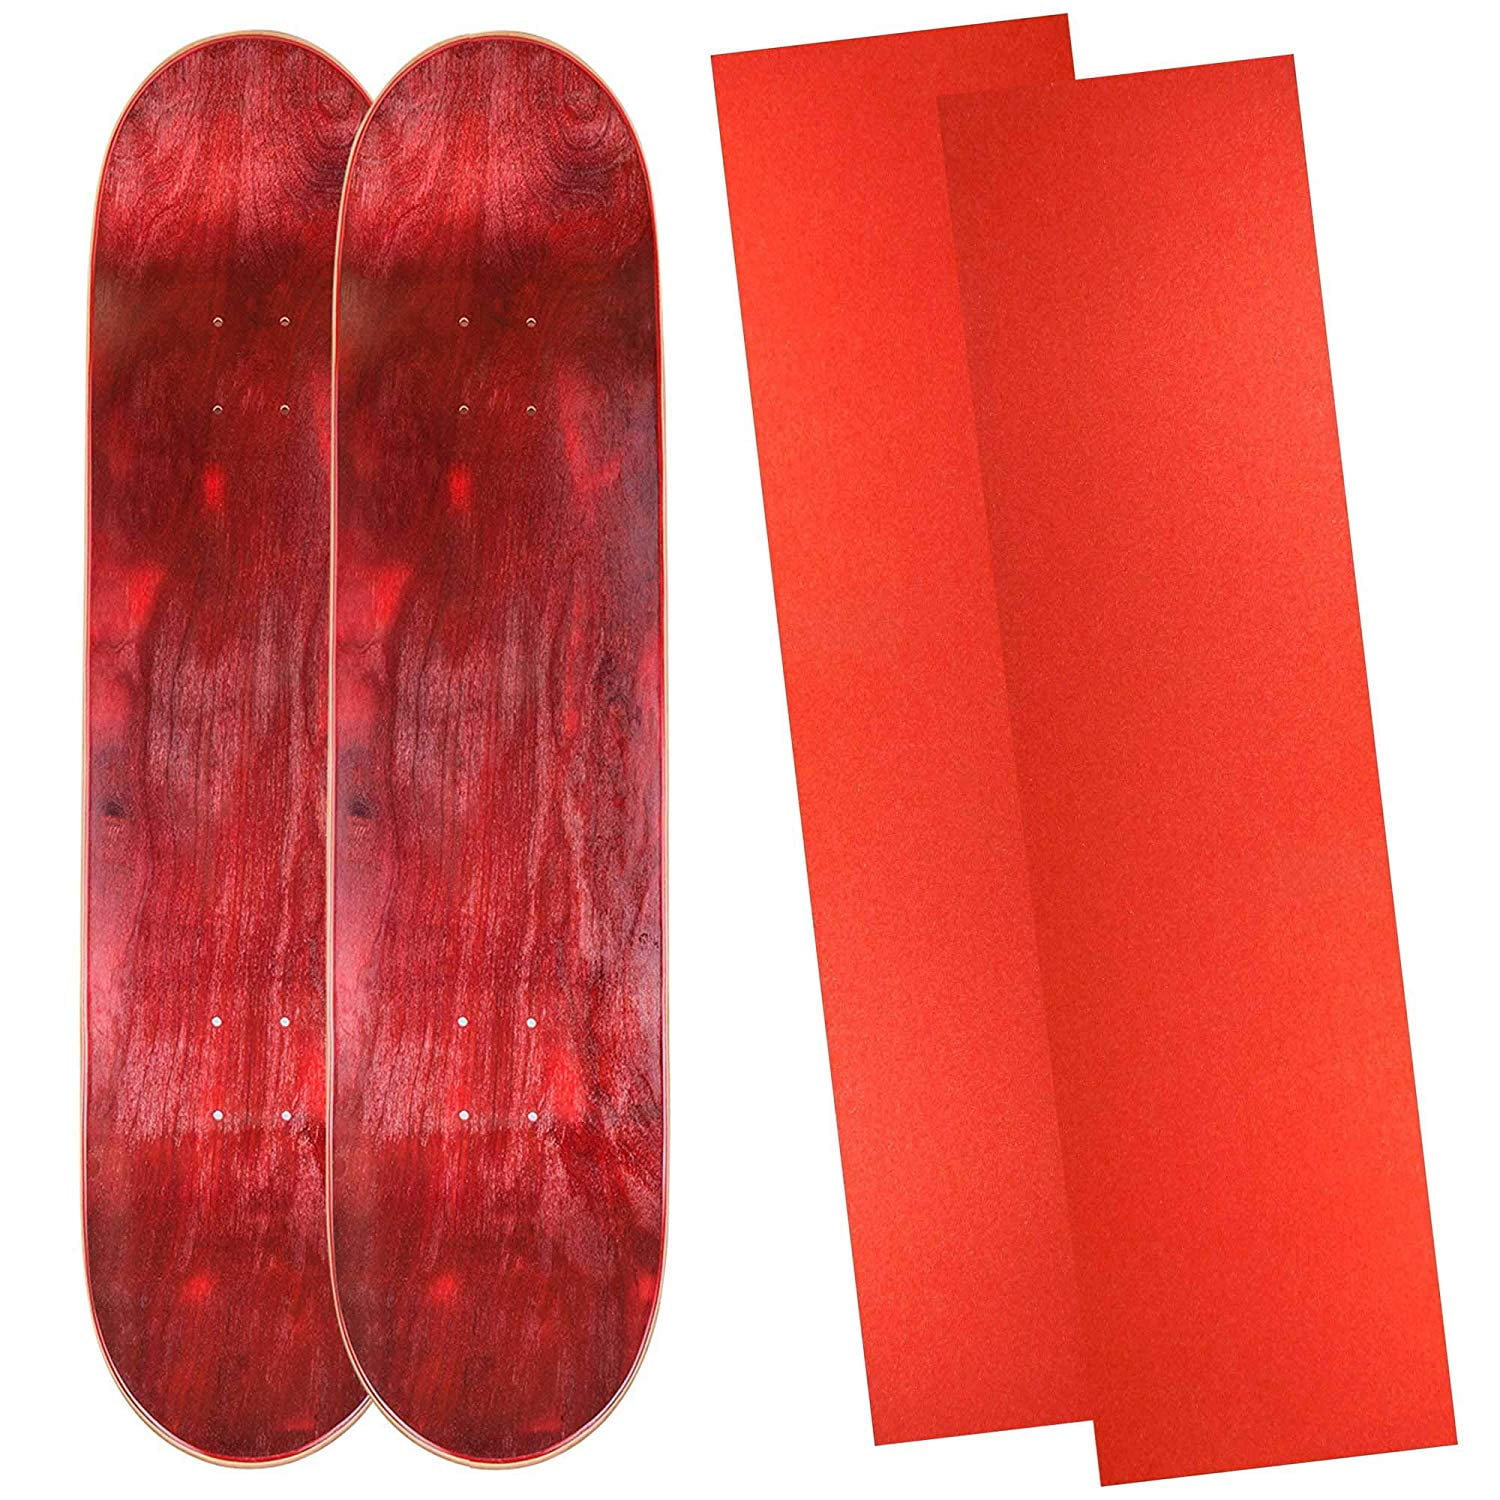 Cal7 Premium Quality Skateboard Deck 7.75 In with Grip Tape for all Skill Level 